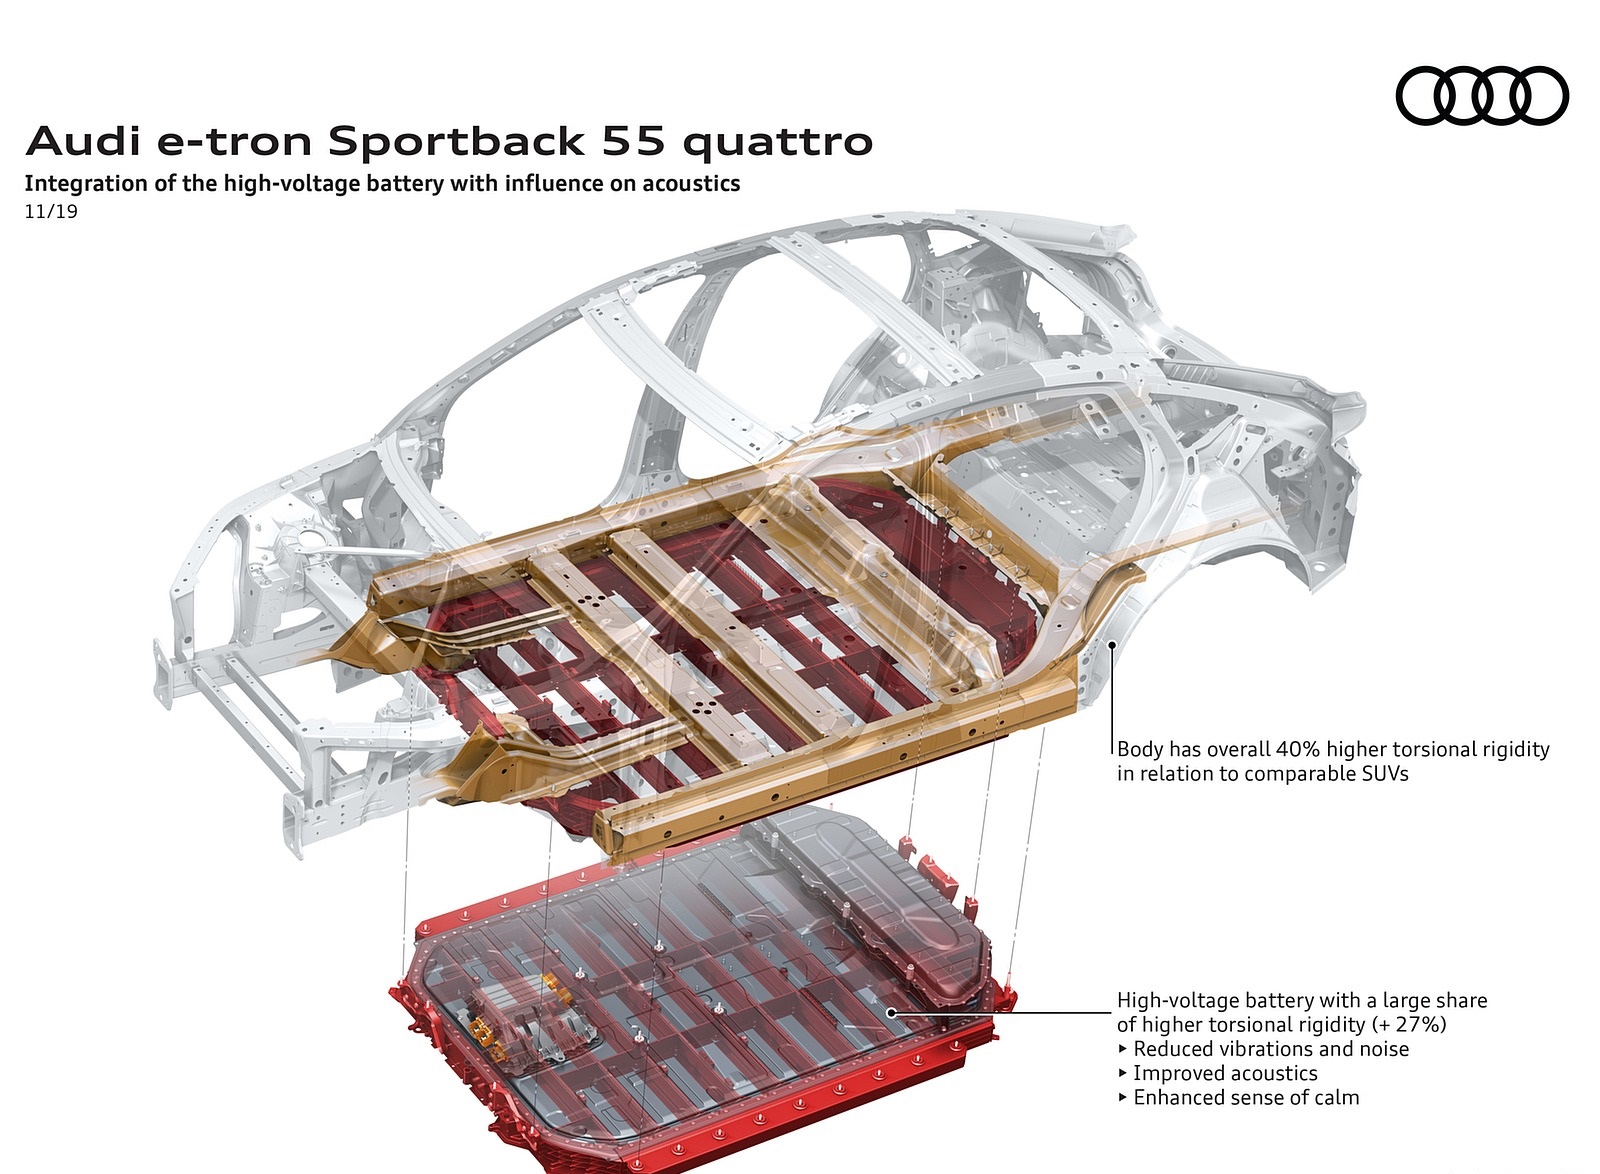 2020 Audi e-tron Sportback Integration of the high-voltage battery with influence on acoustics Wallpapers #110 of 145